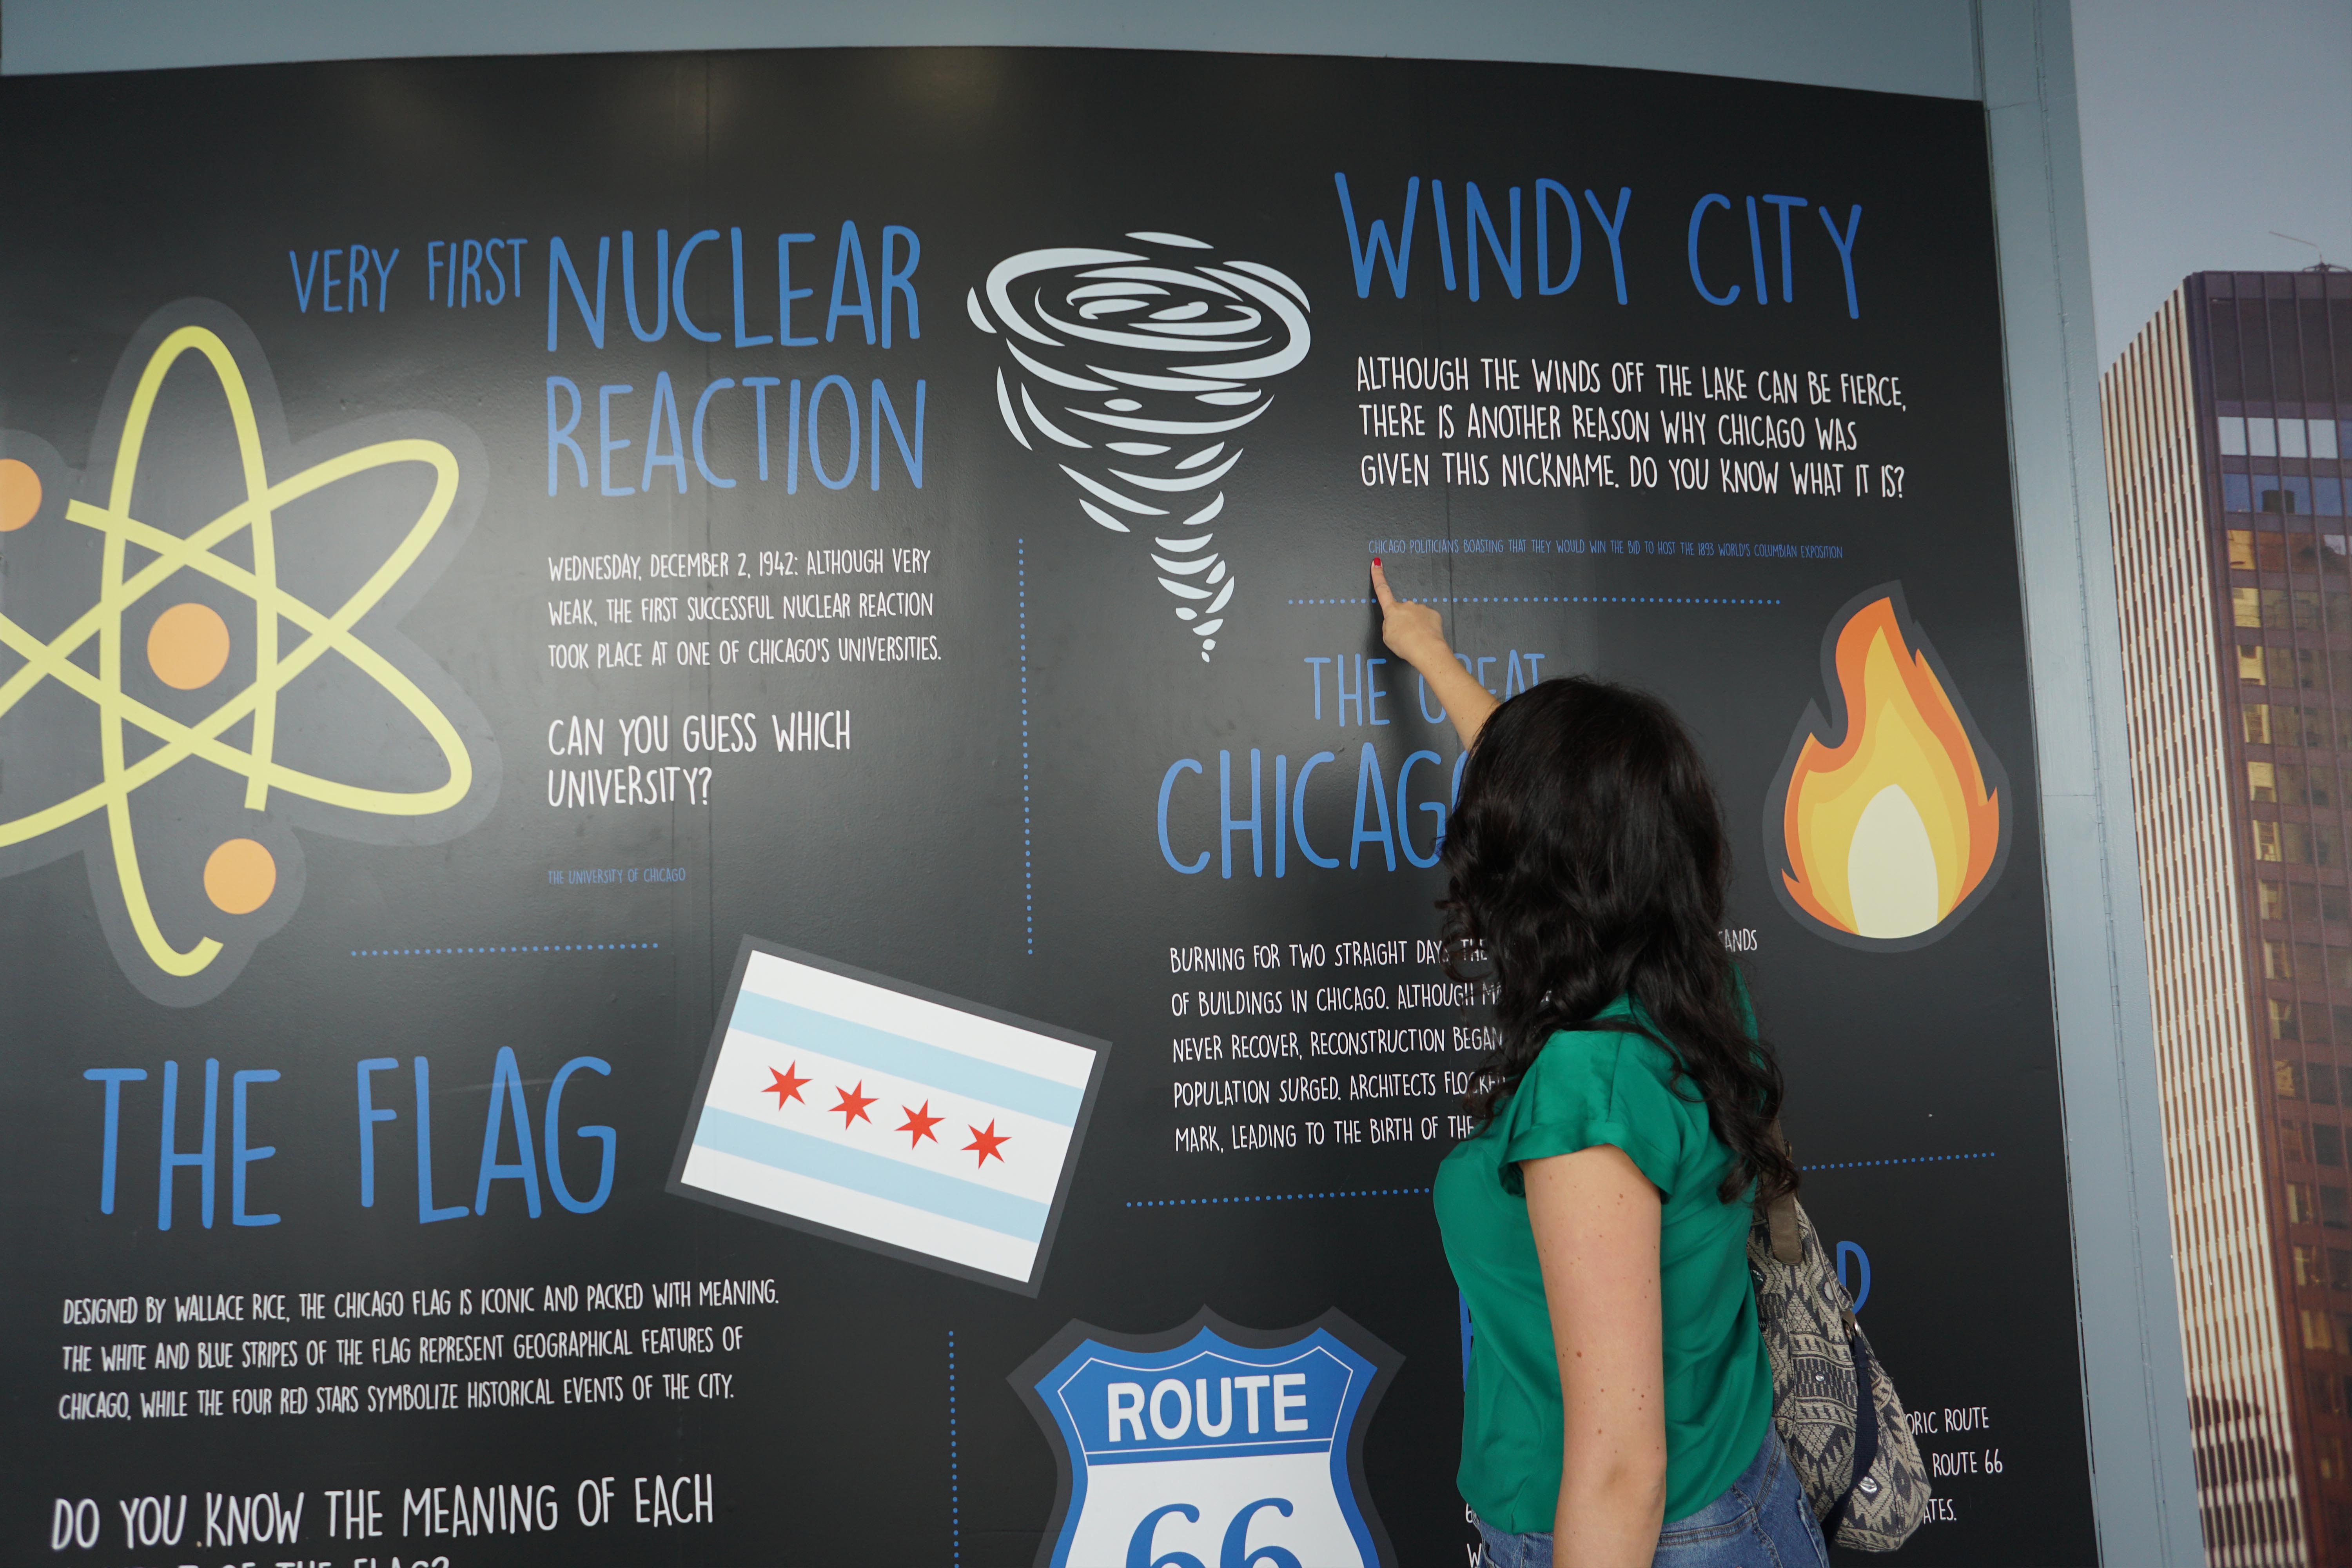 Woman pointing at a fun fact about the "Windy City" at The Willis Tower's Skydeck